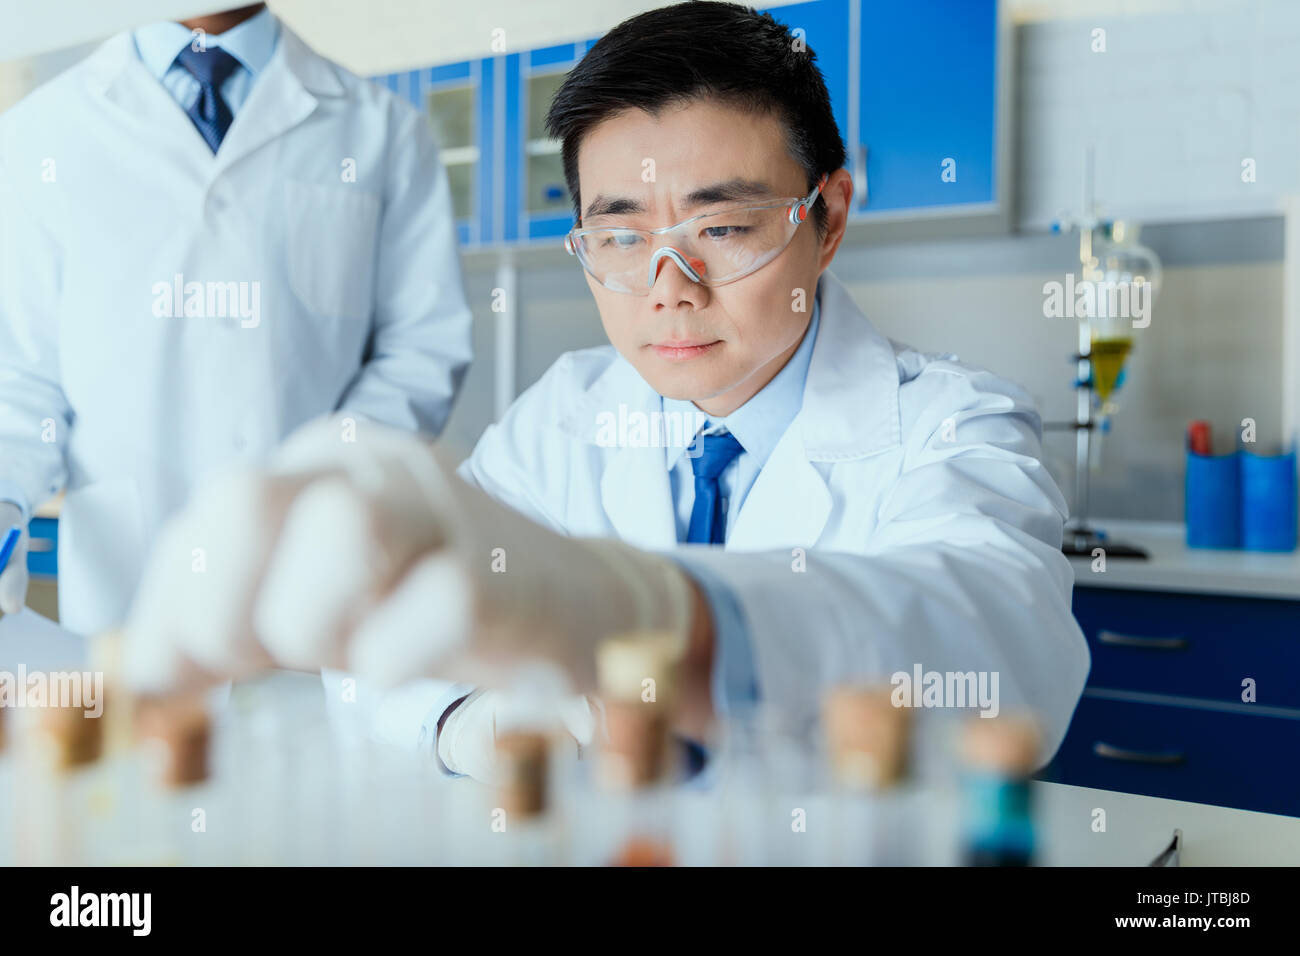 Asian scientist in white coat working in chemical laboratory Stock Photo